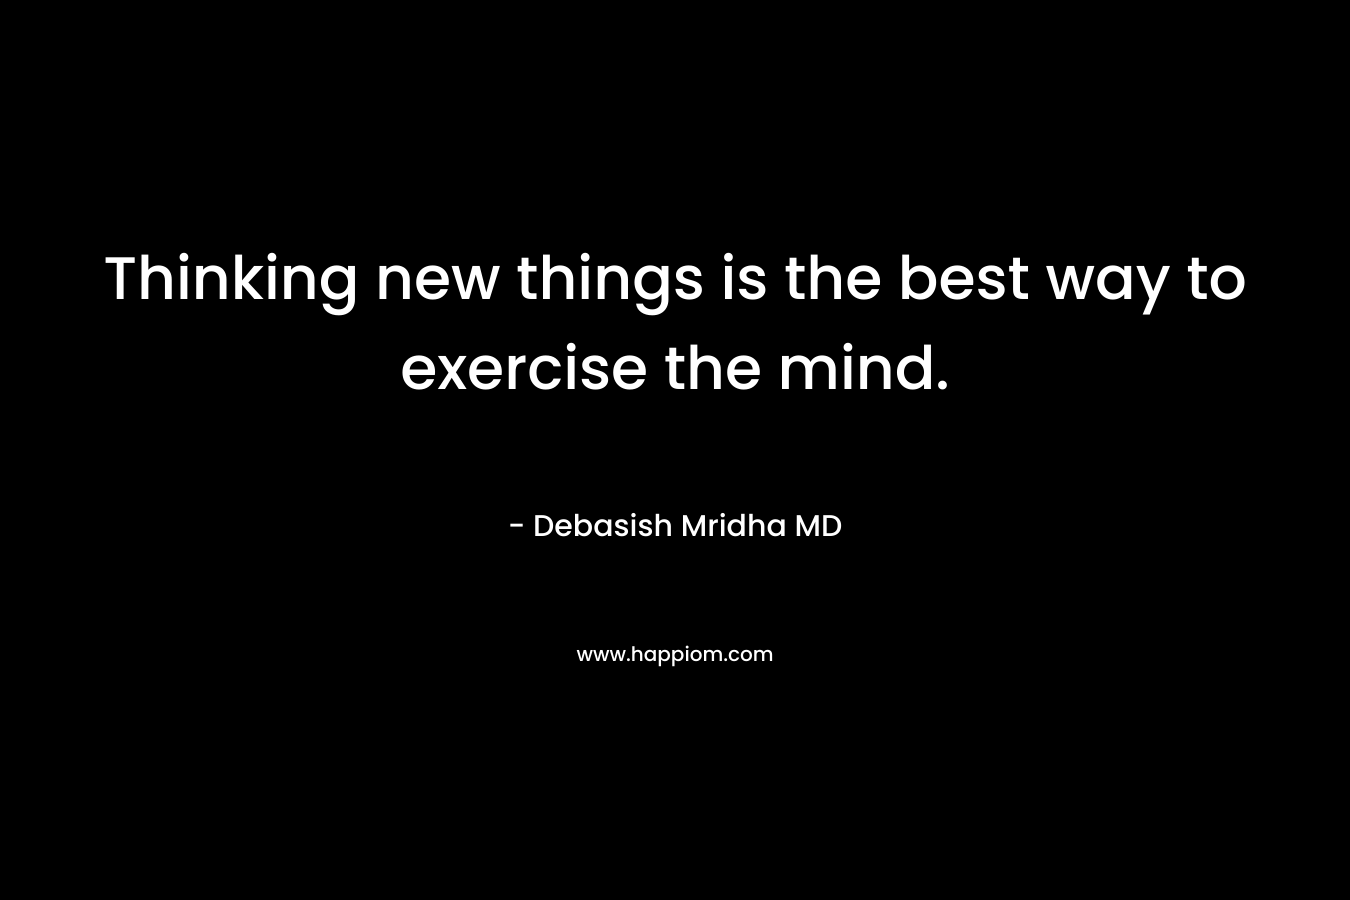 Thinking new things is the best way to exercise the mind.